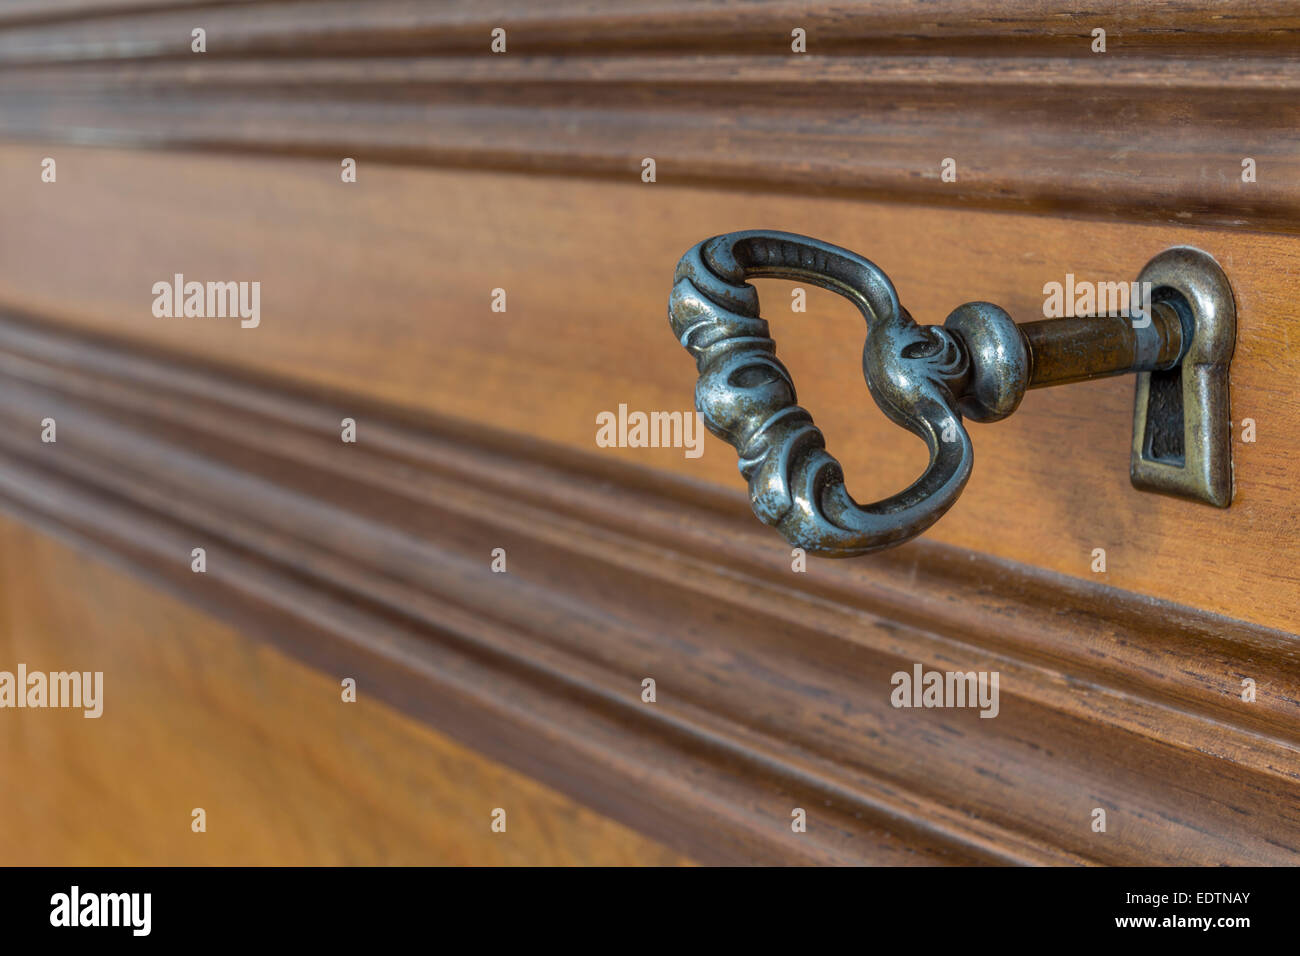 Ancient key in the keyhole of antique furniture Stock Photo